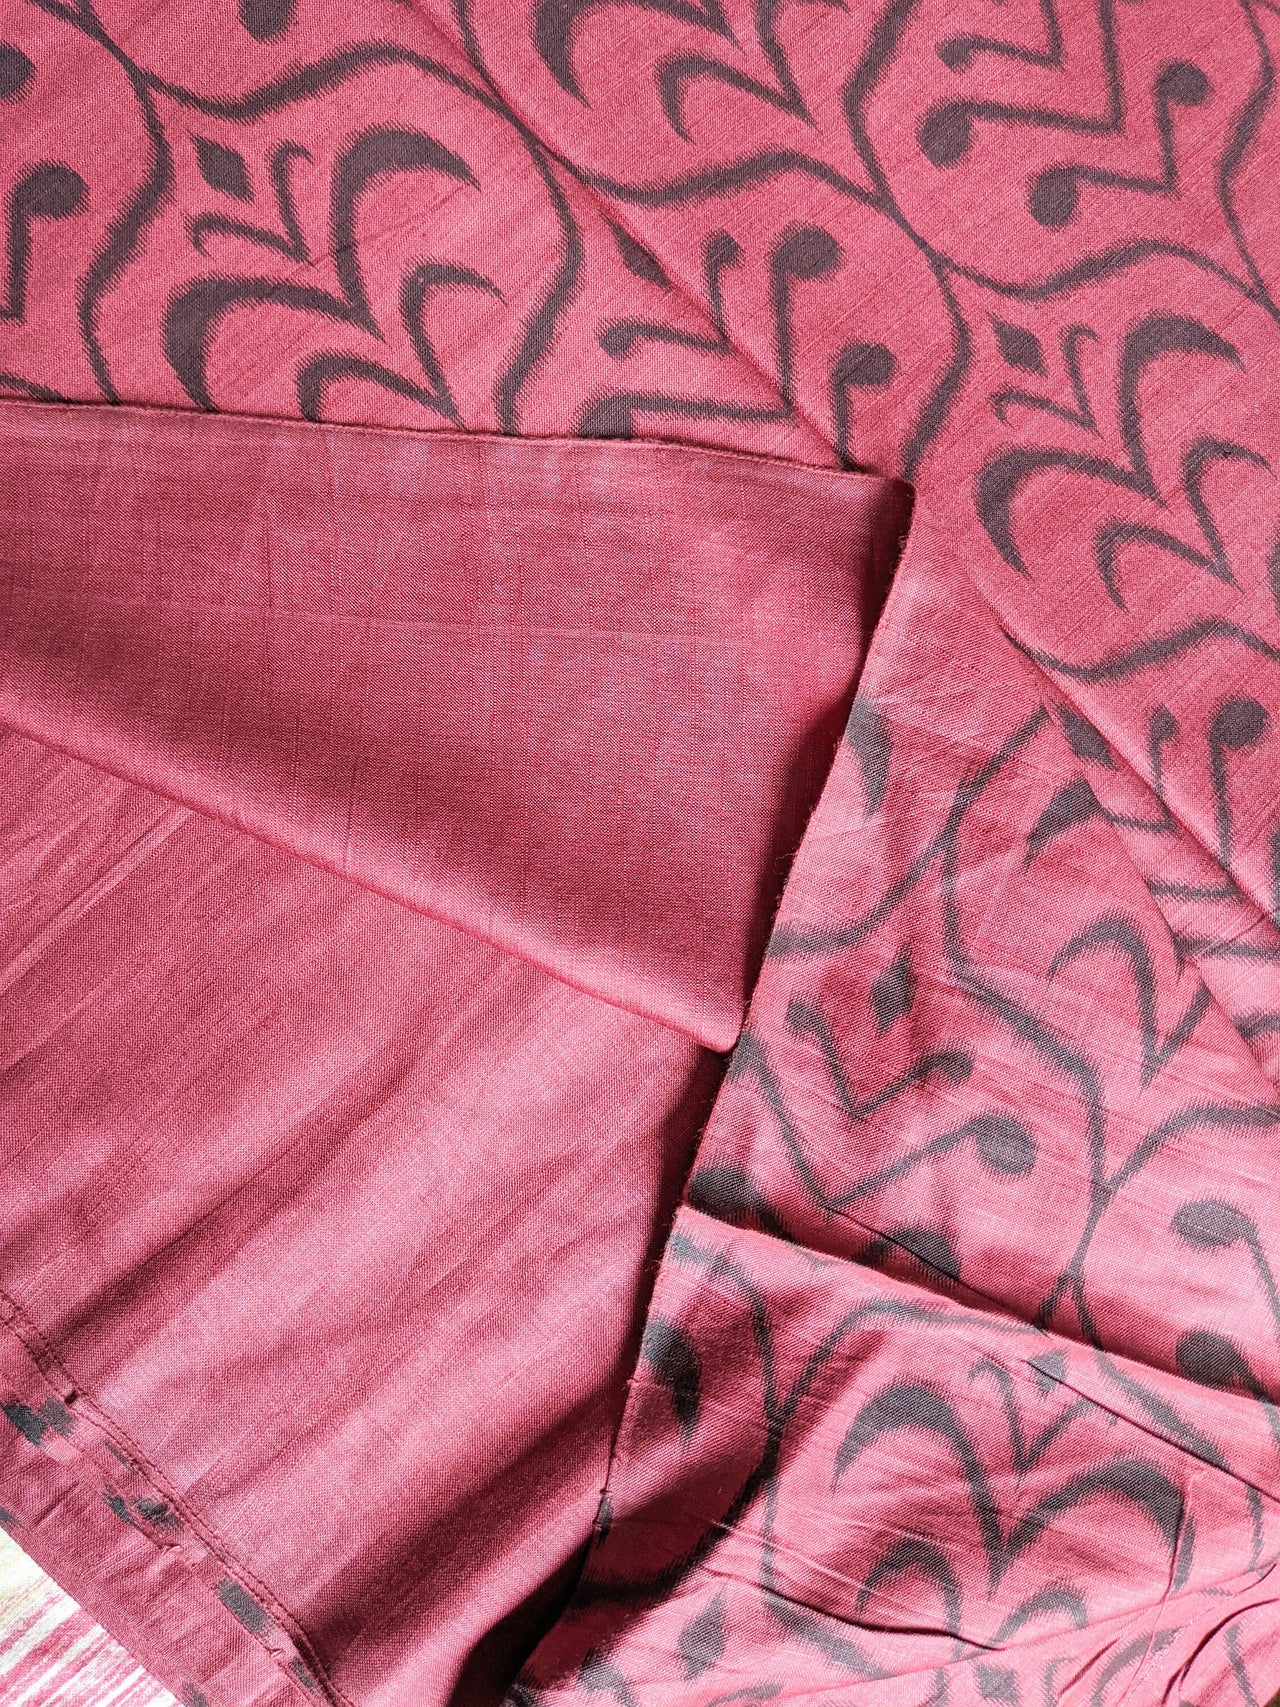 Maroon and Black Printed Cotton Silk Fabric, Festive Fabric, Holiday Fabric